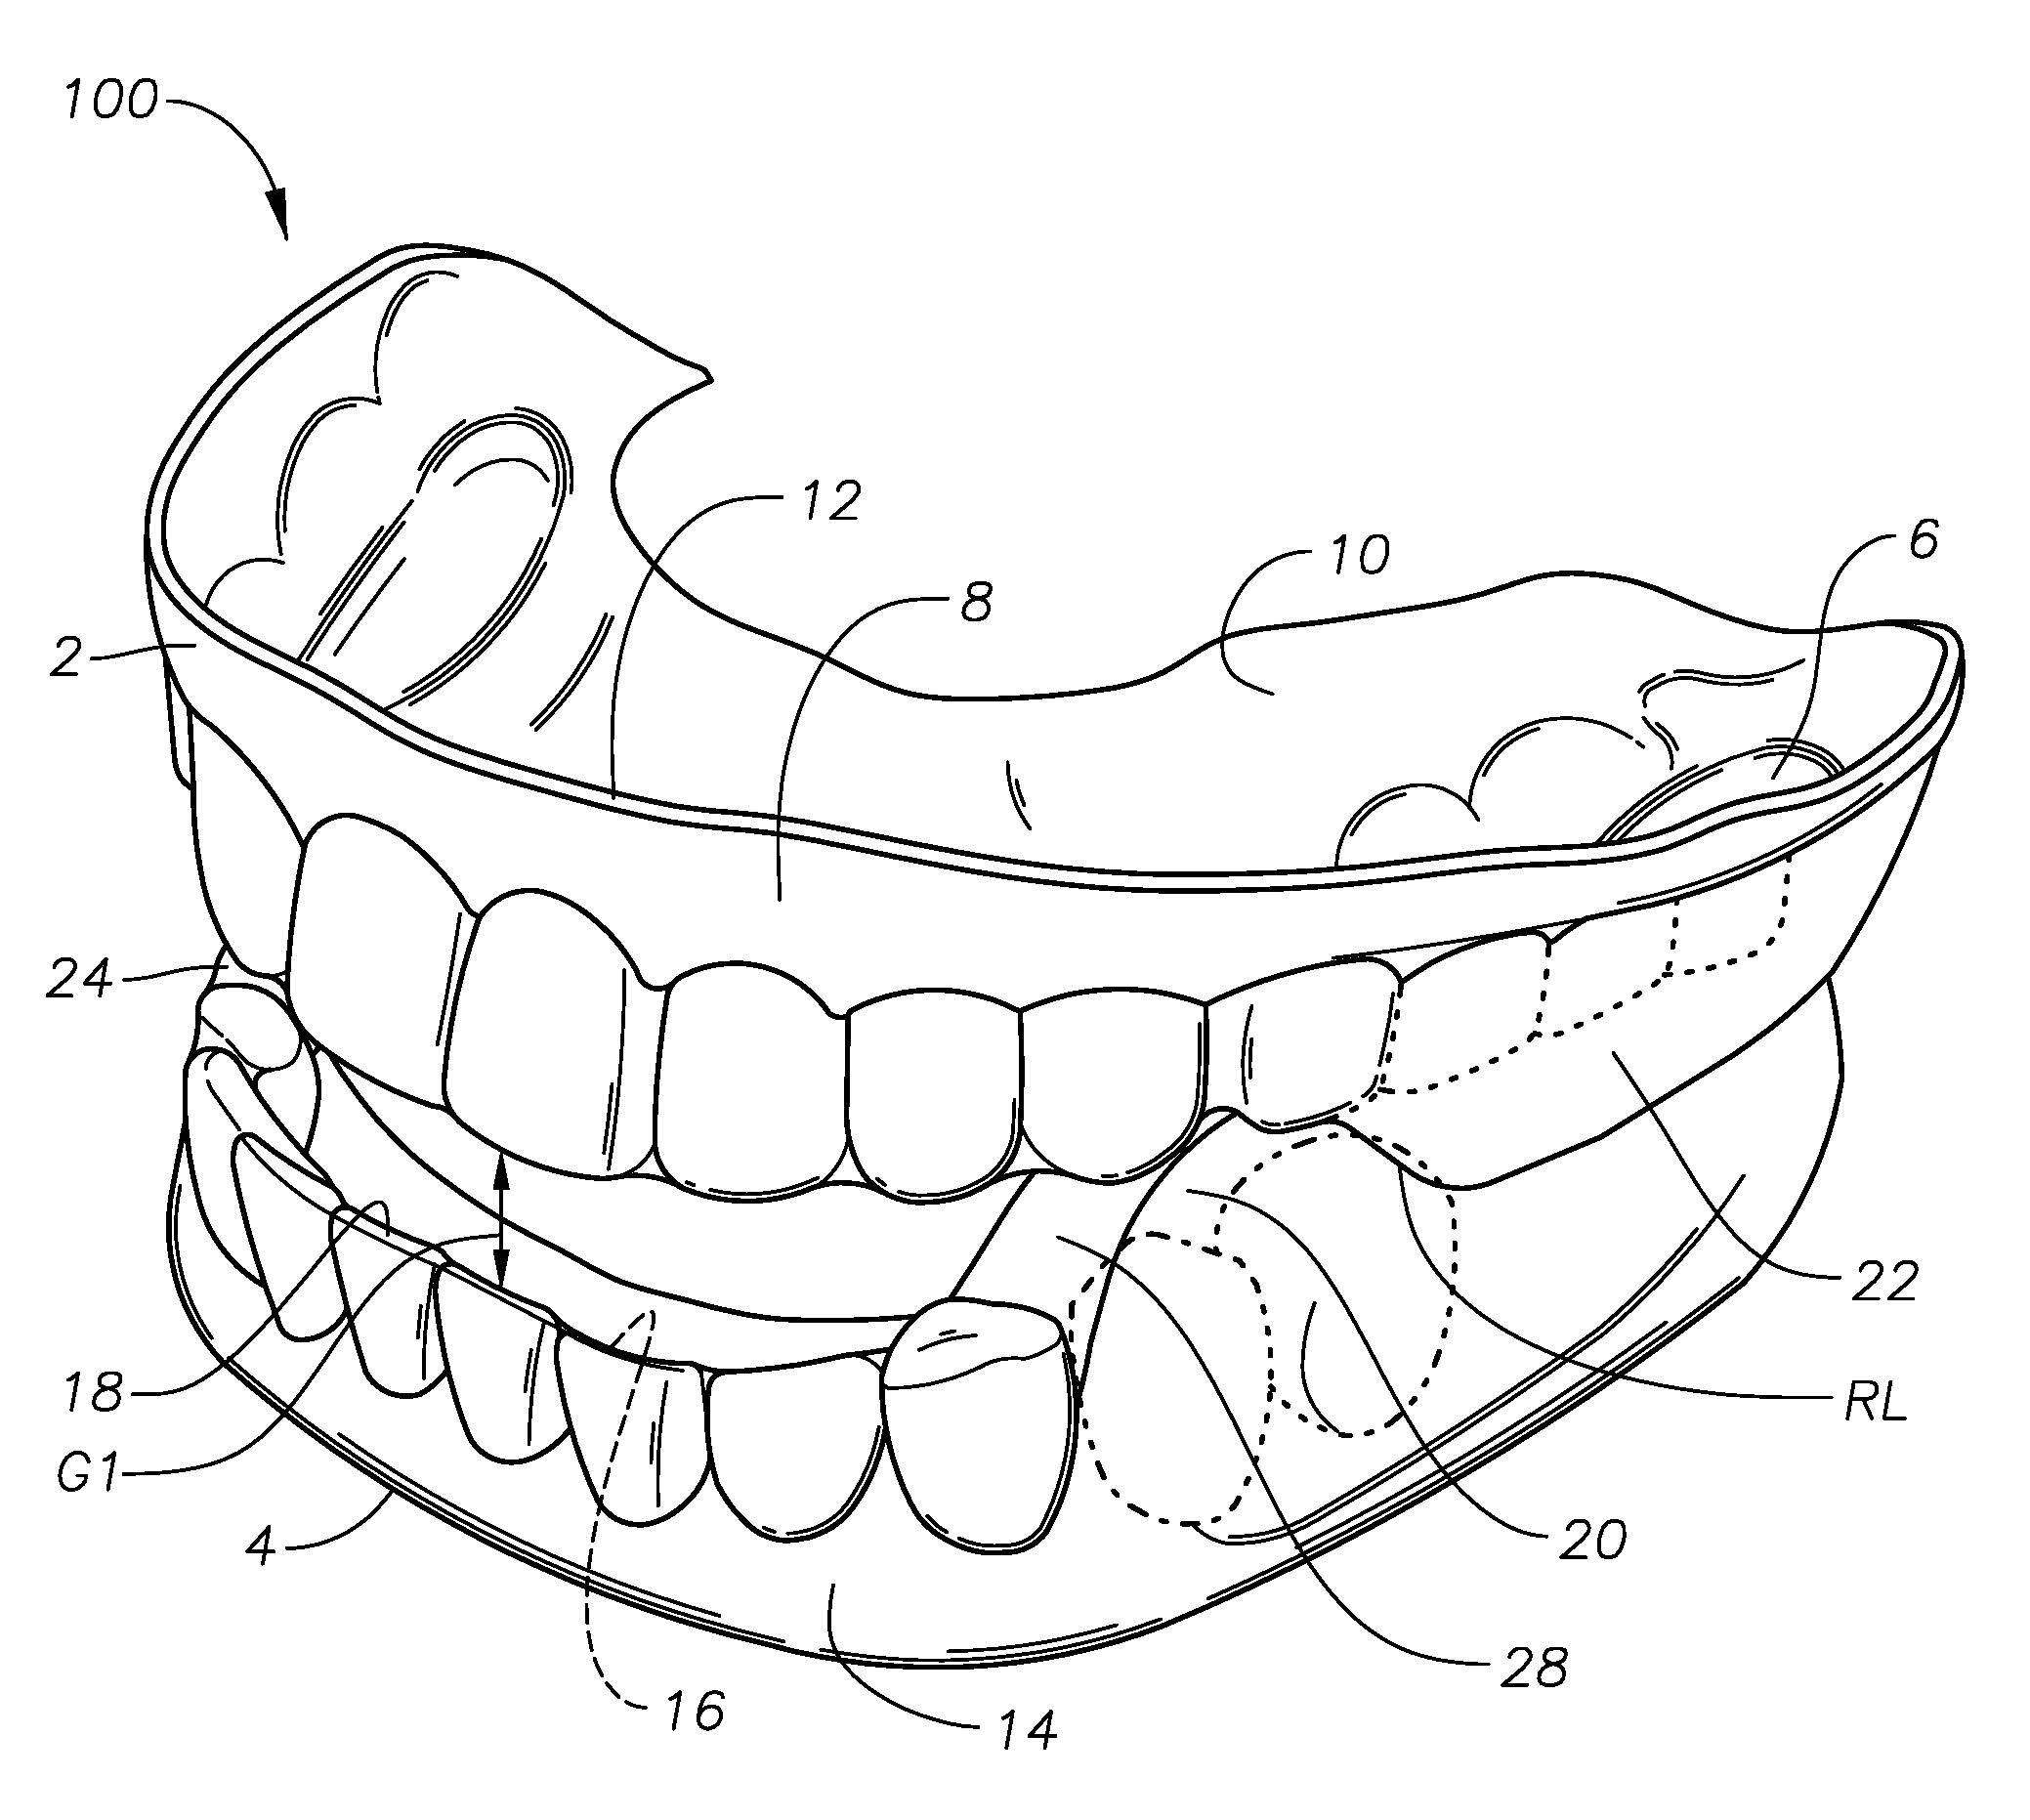 Oral devices